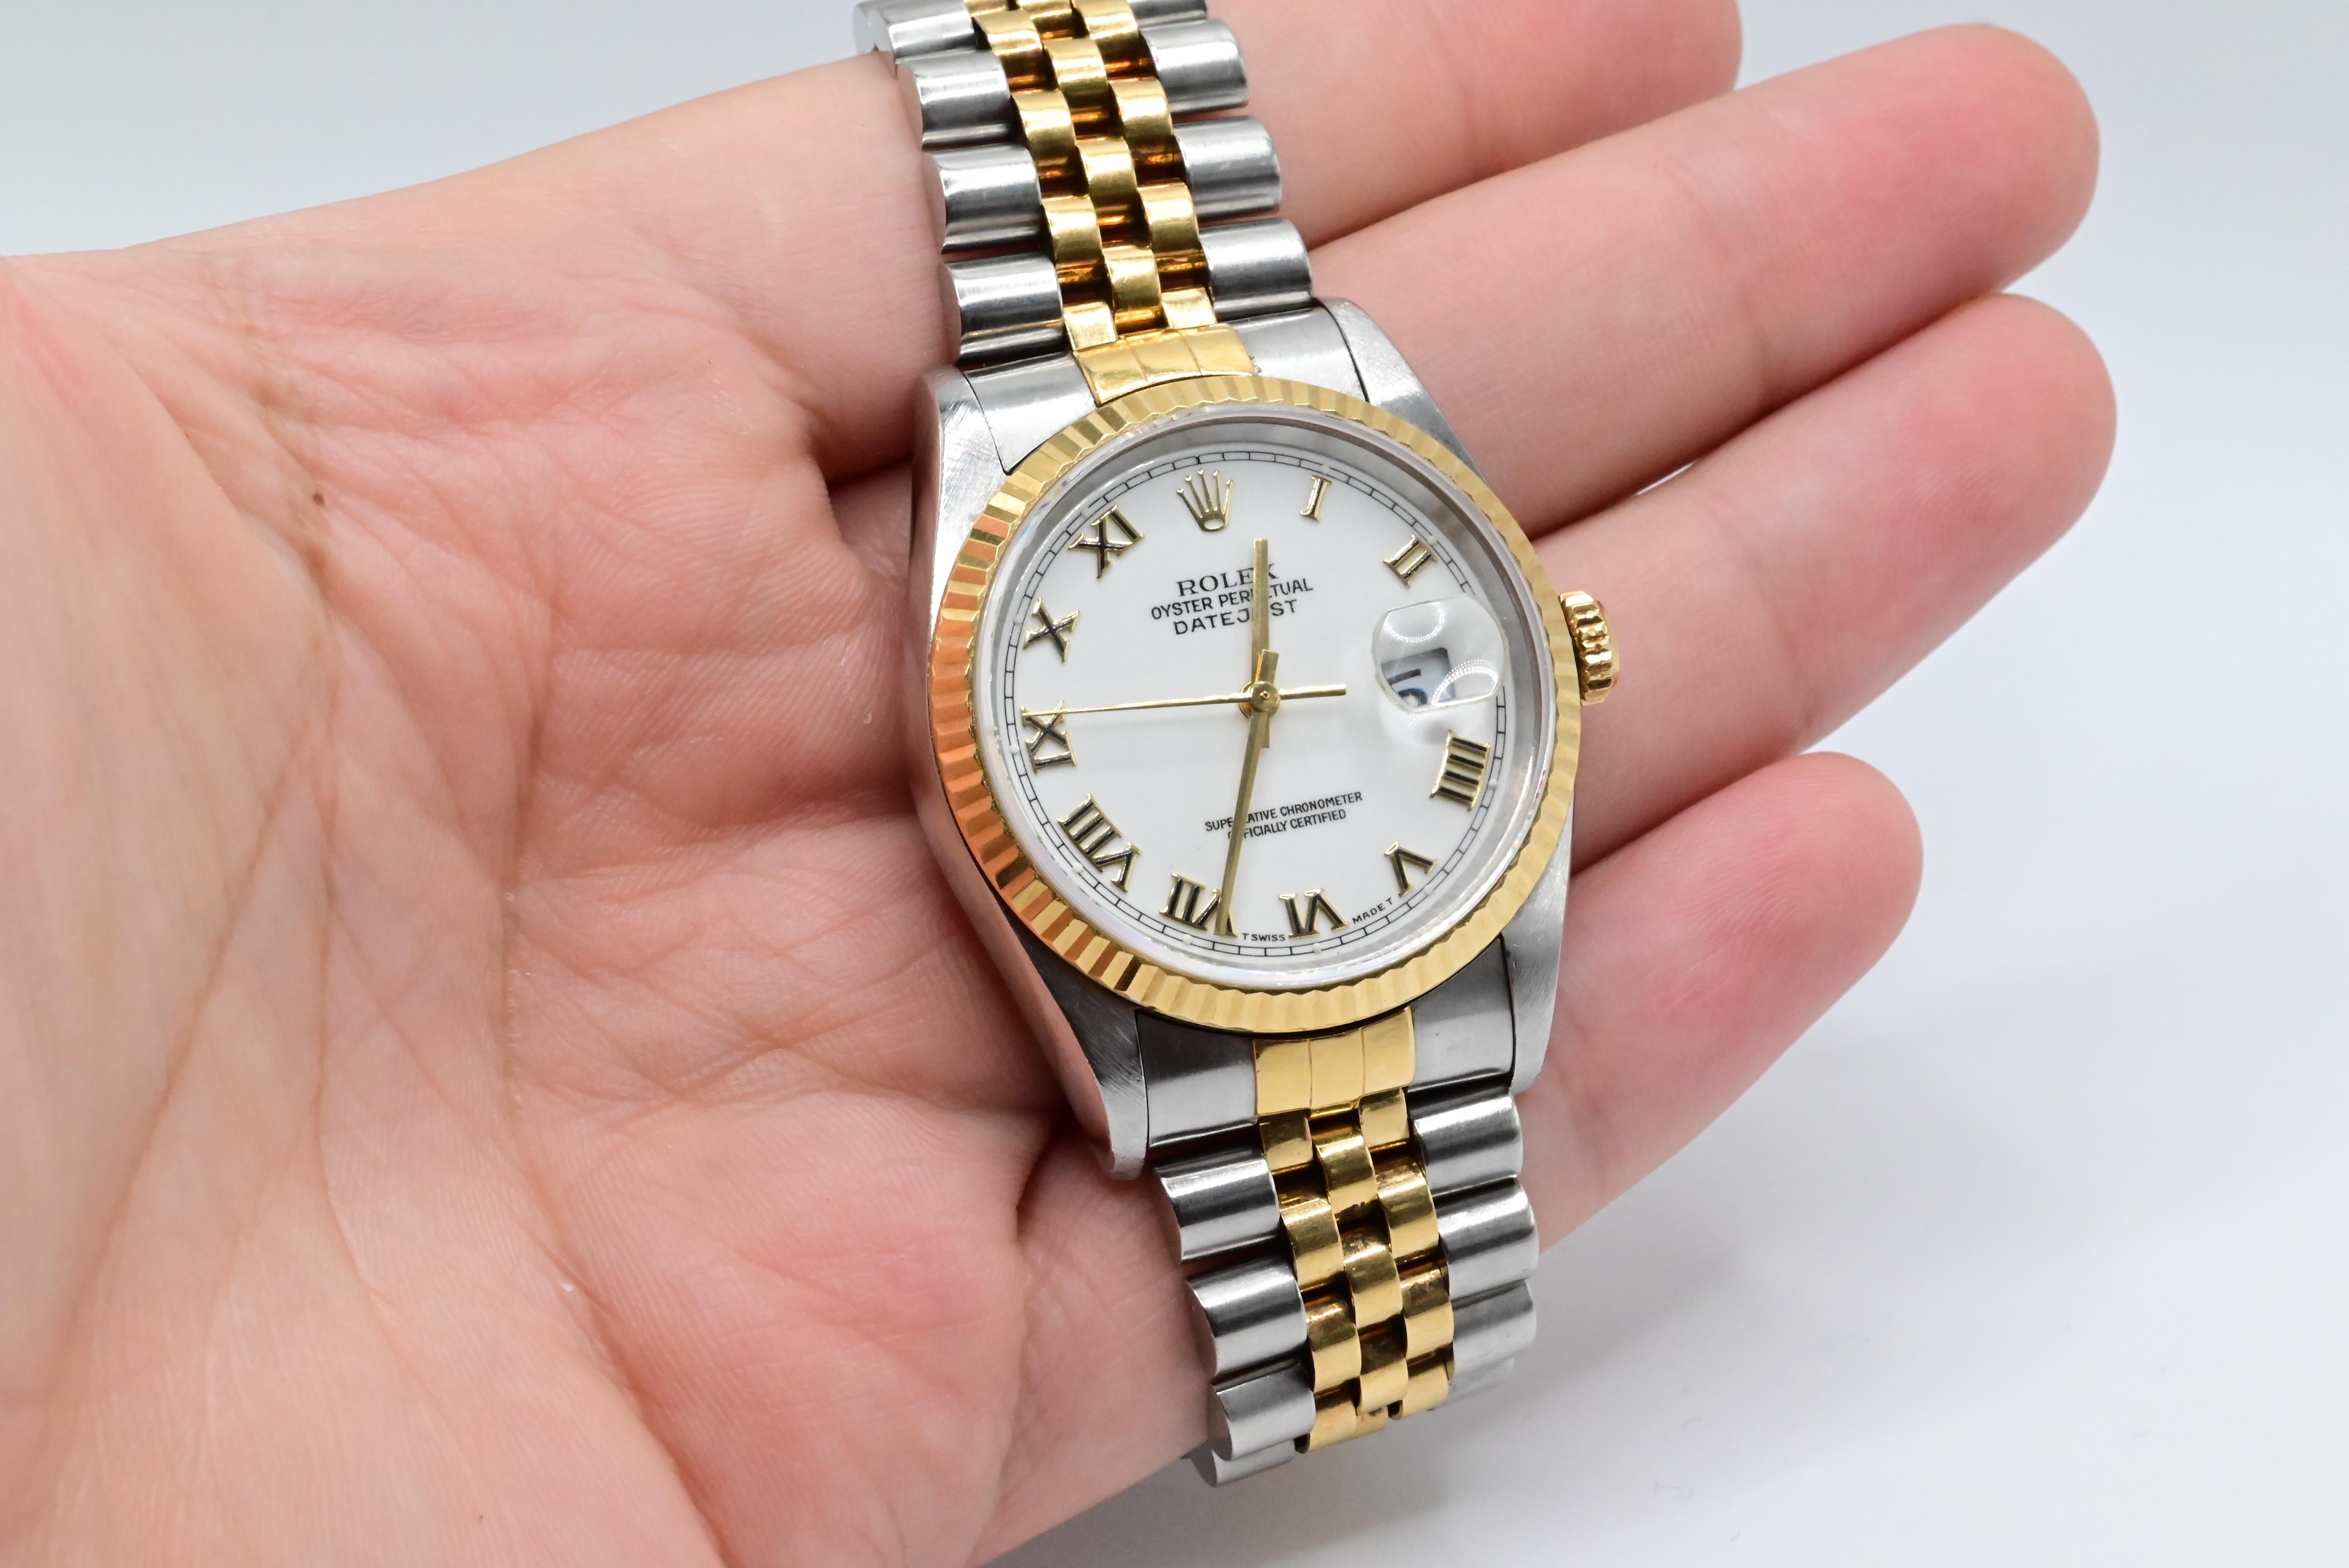 Rolex Wristwatch with White Dial Roman Numeral 
Model Datejust Two Tone 16013
36MM Size Case
In Perfect Working Order
Has normal use ware but no damage 
Can be worn by Men or Women
No Box or Papers 
1980-1990s model


